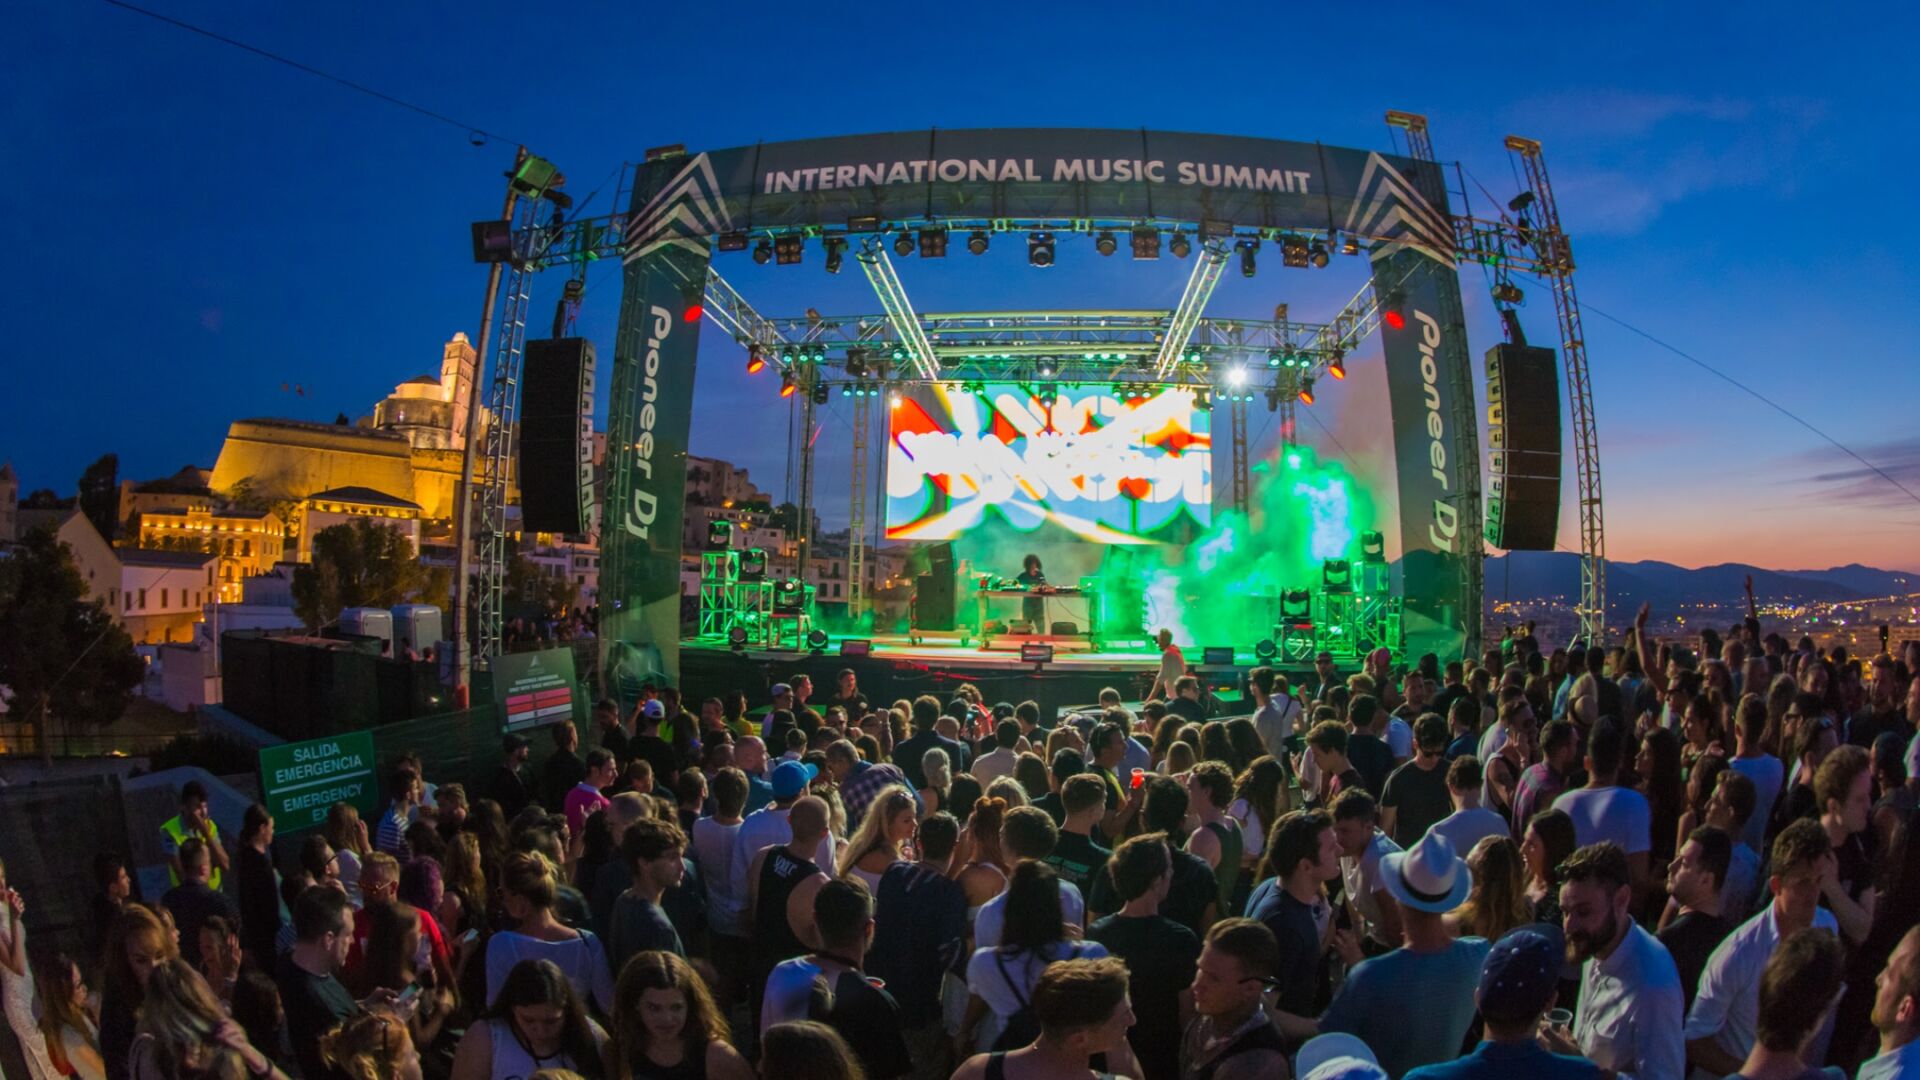 Ims Ibiza 2024 Unveils Its 15Th Edition: A Comprehensive Summit Program At The Forefront Of Electronic Music Evolution